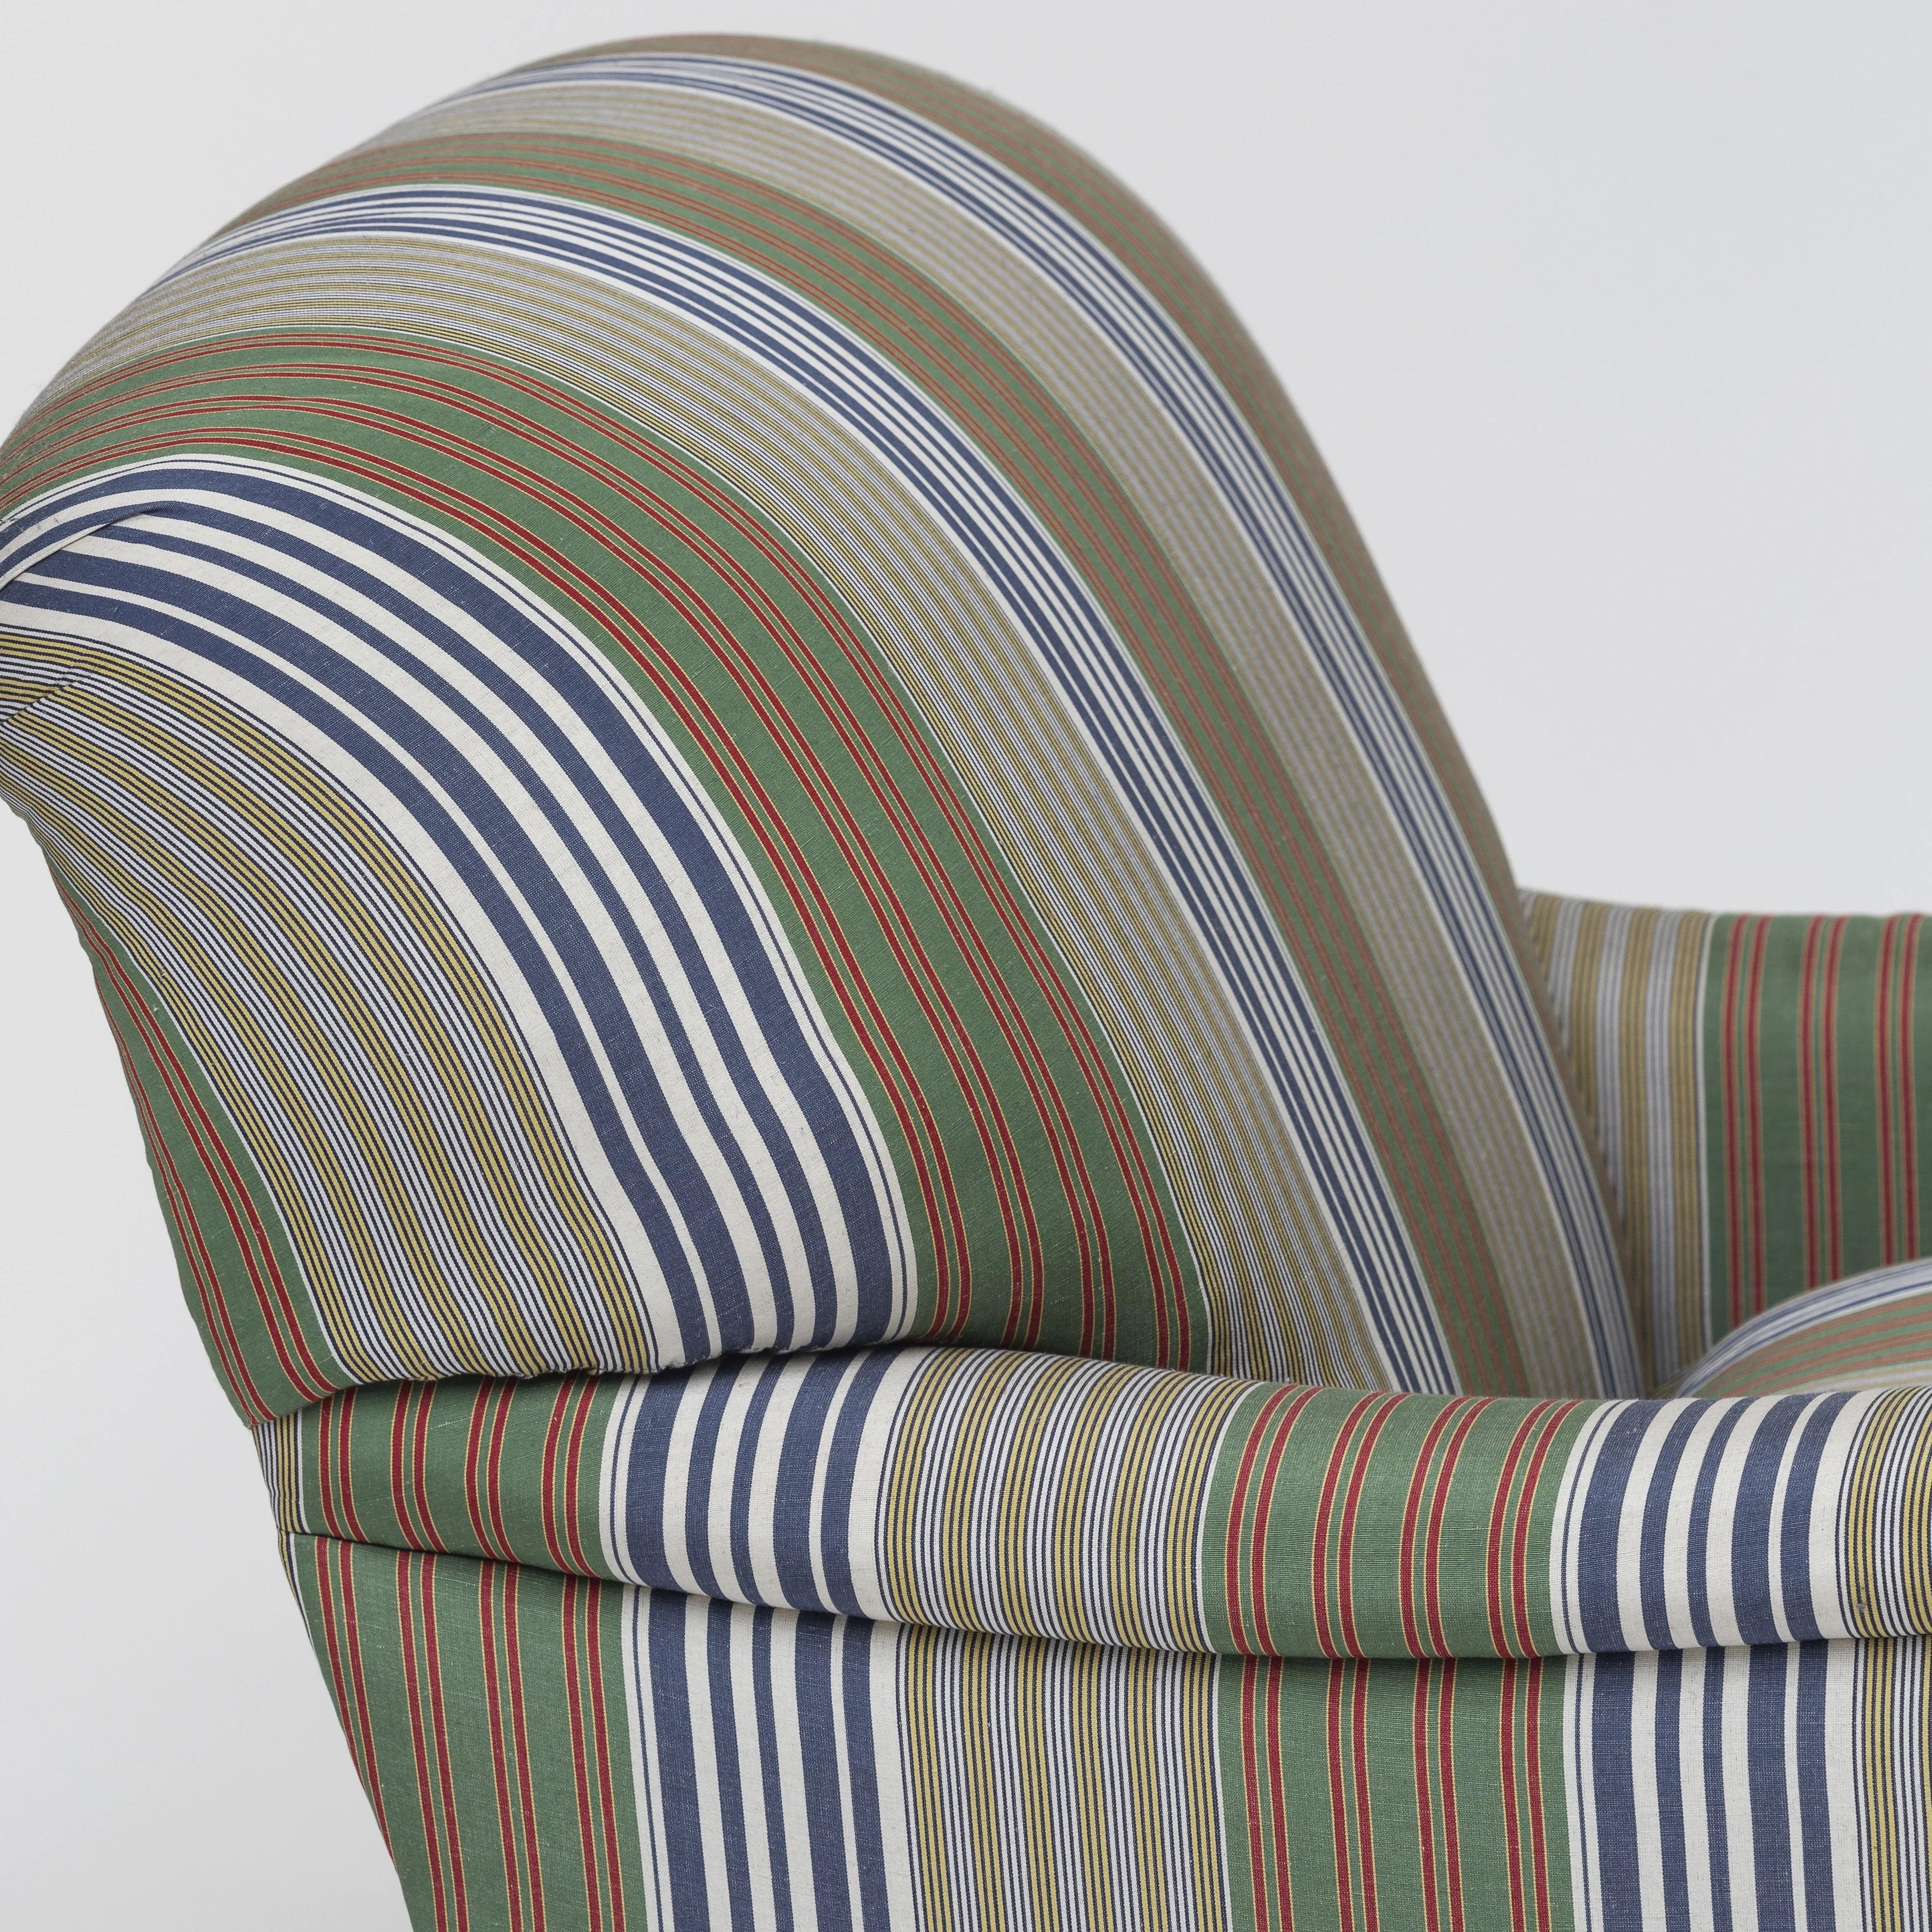 The design copied from an English country house original and handmade to order in our workshops. Shown here covered in our Fela ticking stripe available from Tissus d’Helene.
Price does not include fabric.